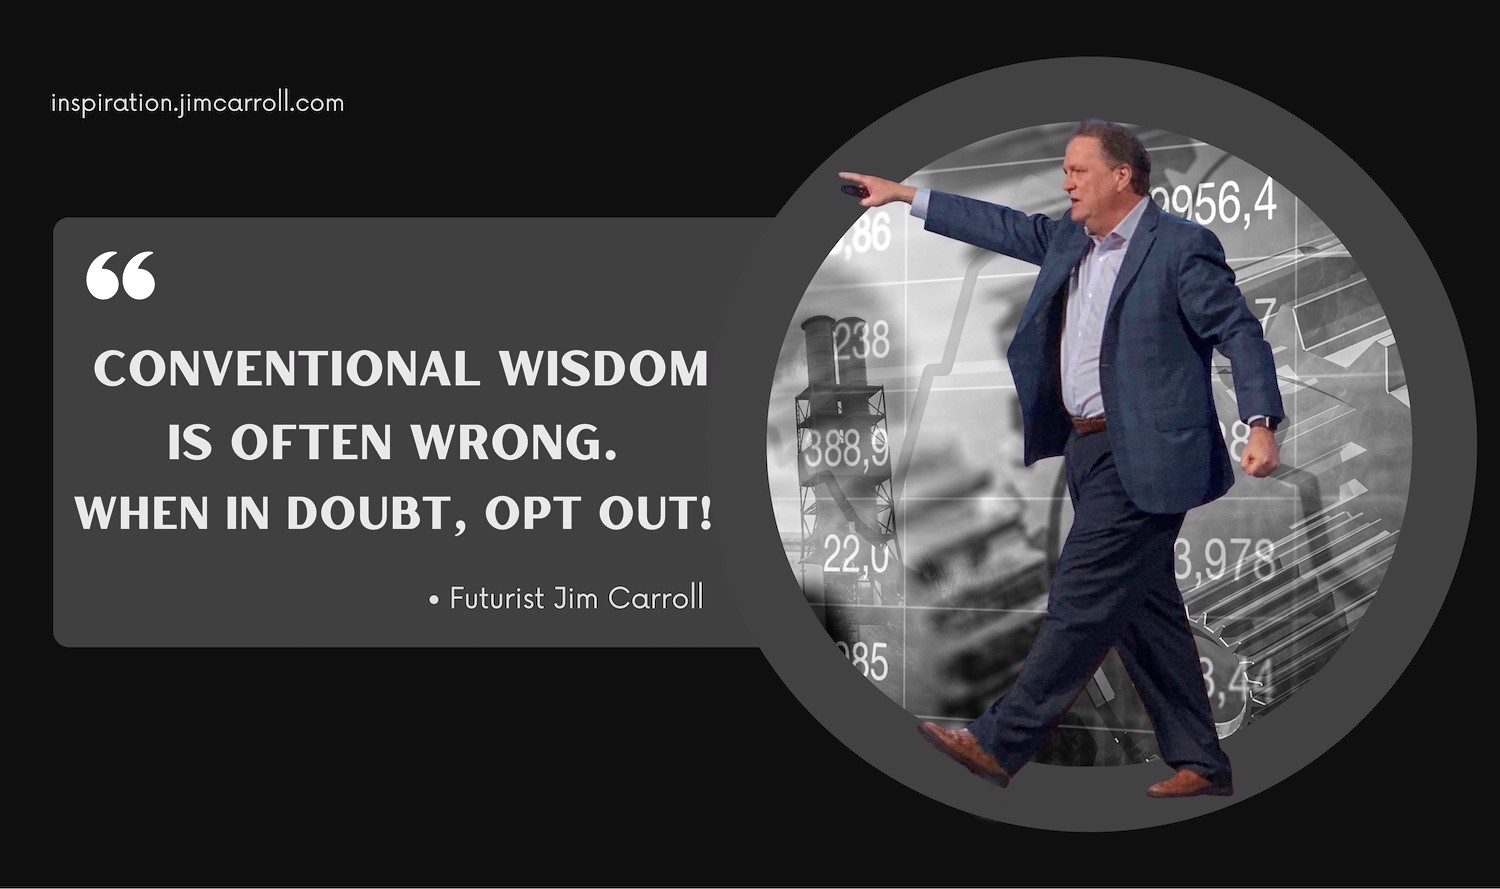 "Conventional wisdom is often wrong. When in doubt, opt out!" - Futurist Jim Carroll